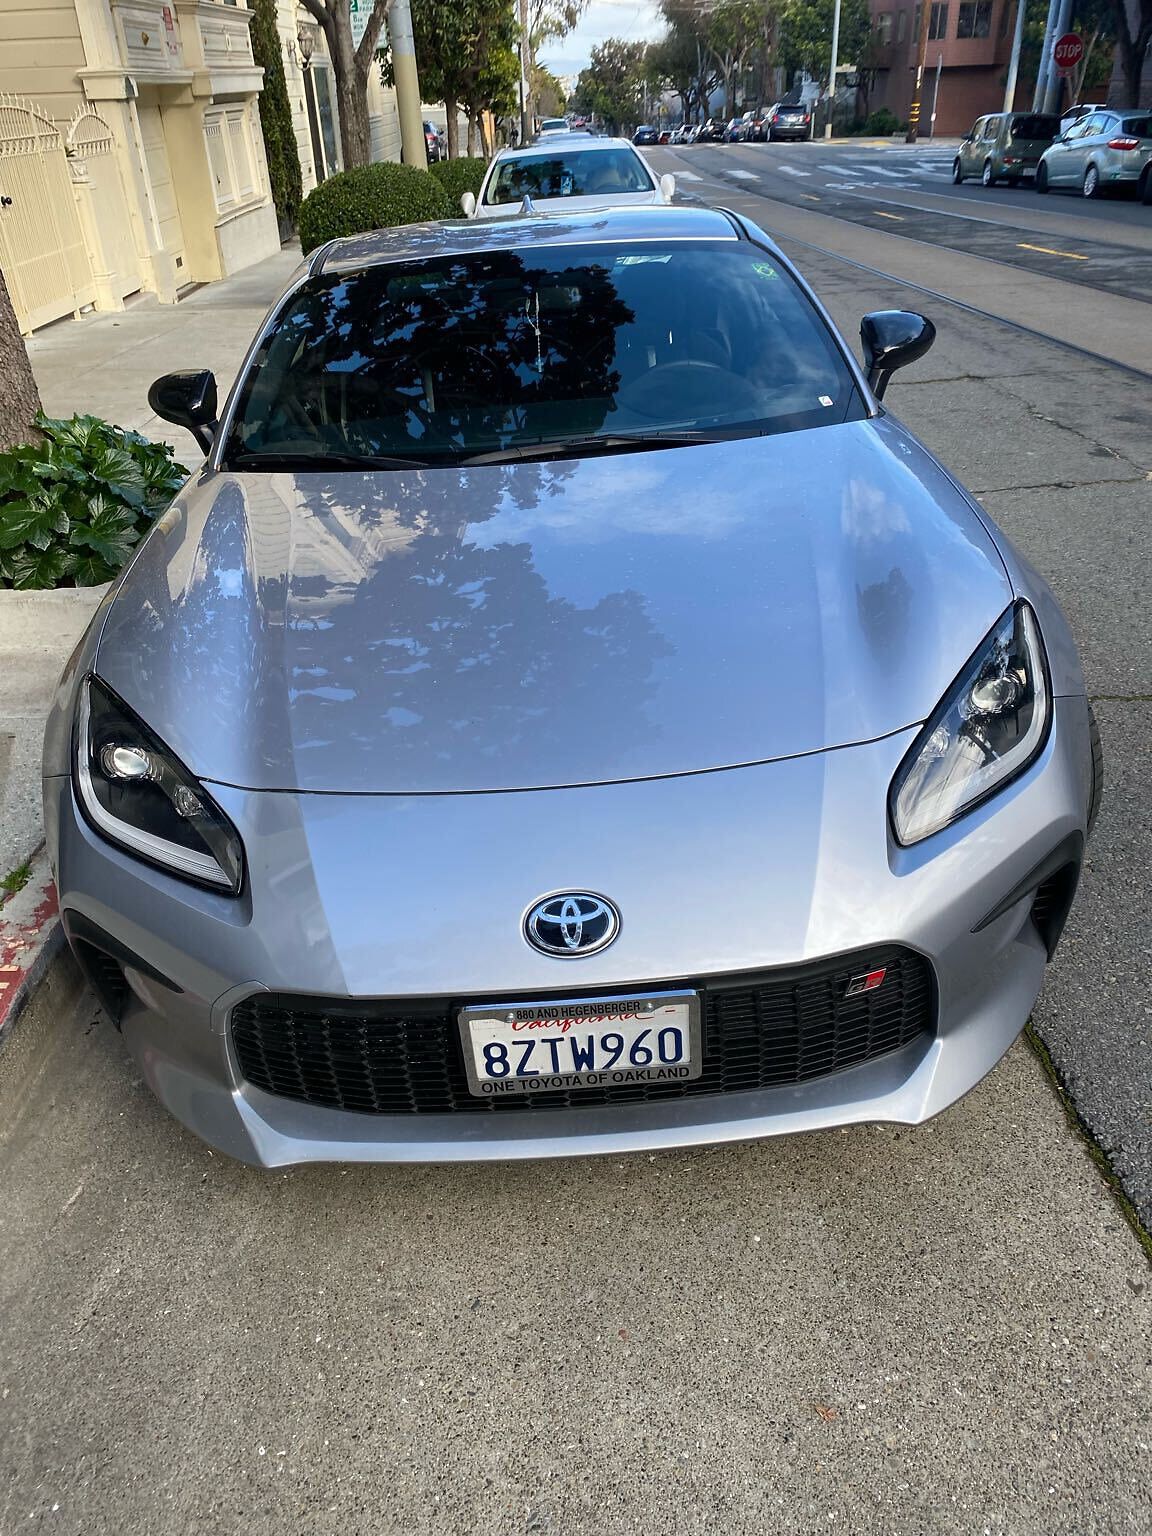 Photo of car in the street with license plate 8ZTW960 in California